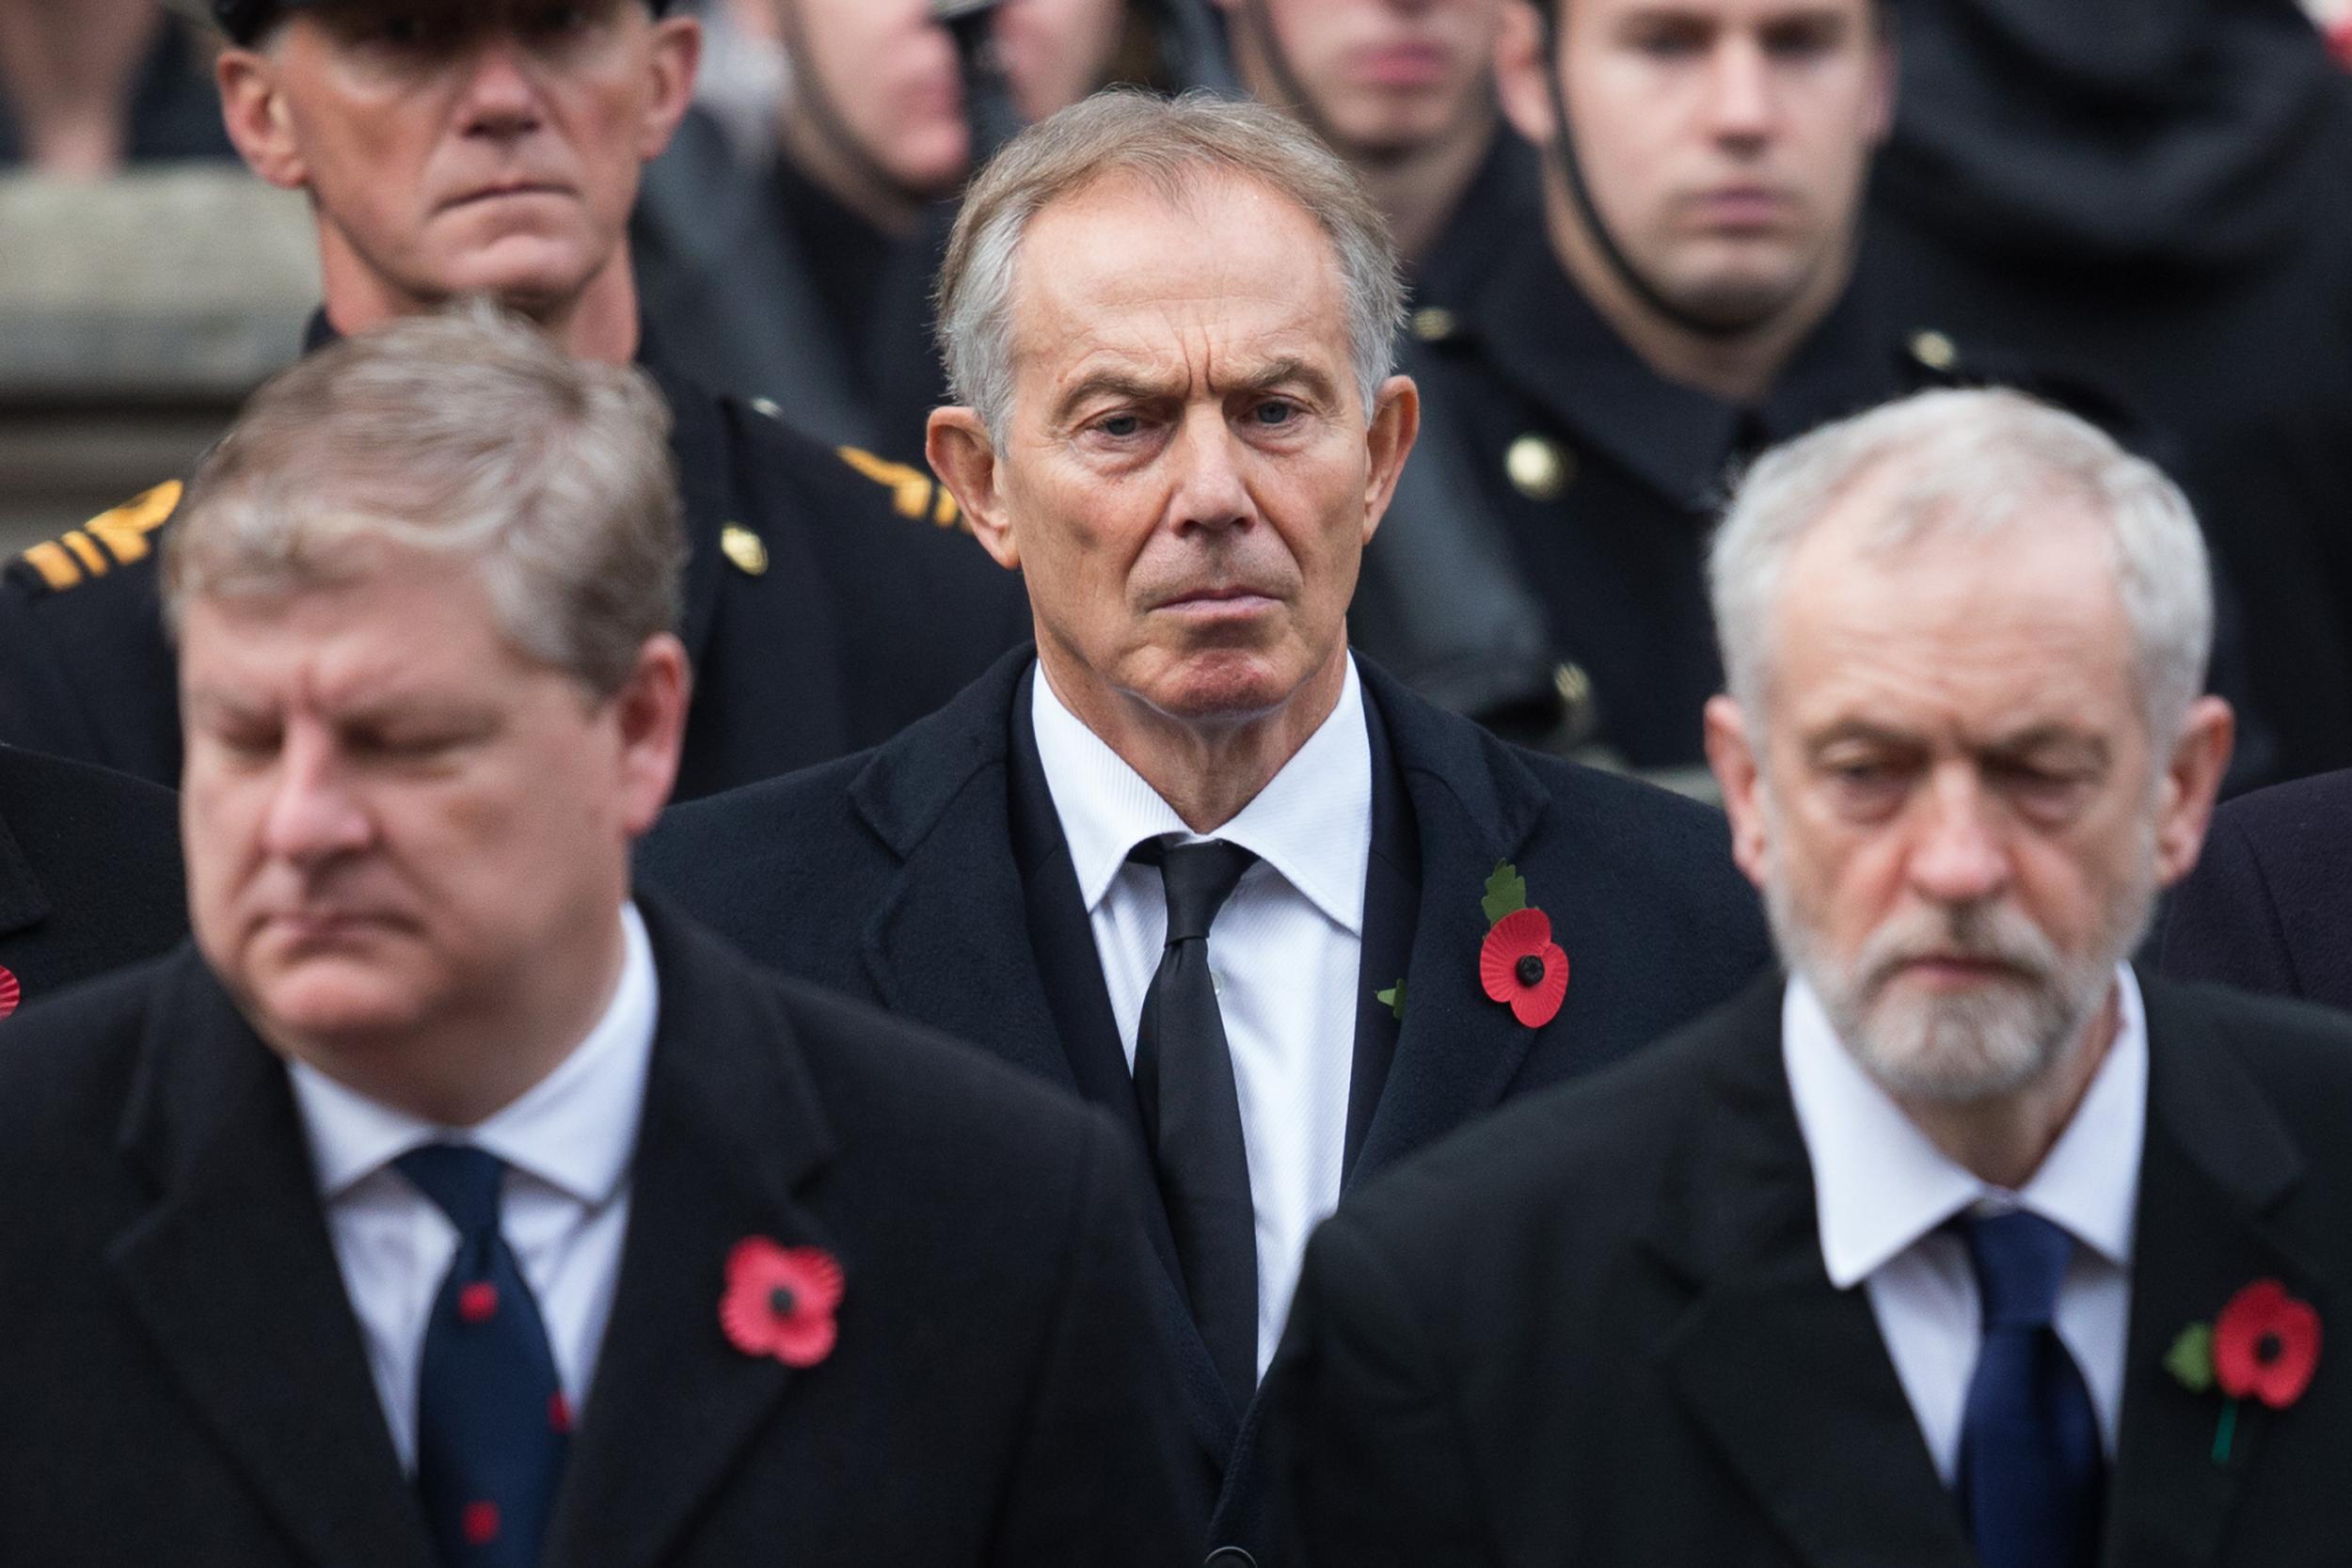 Corbyn's anti-war approach is scarcely more trusted than Blair's interventionist ideas.